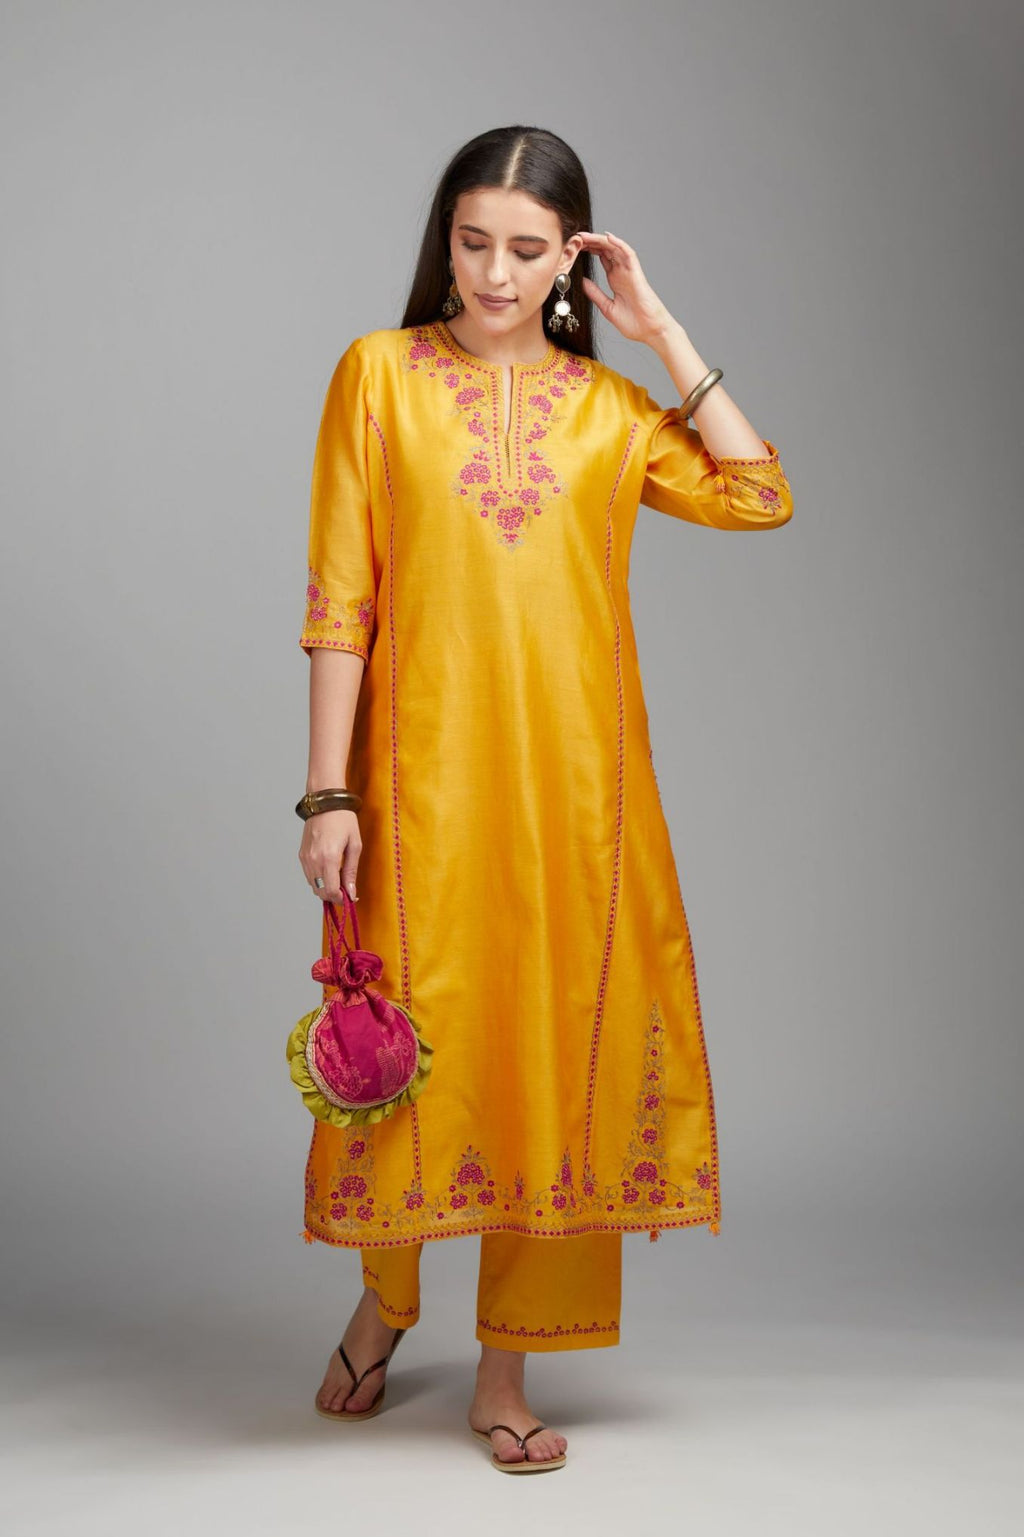 Mango yellow straight kurta set detailed with contrast coloured embroidery at neck and side panel joint seams